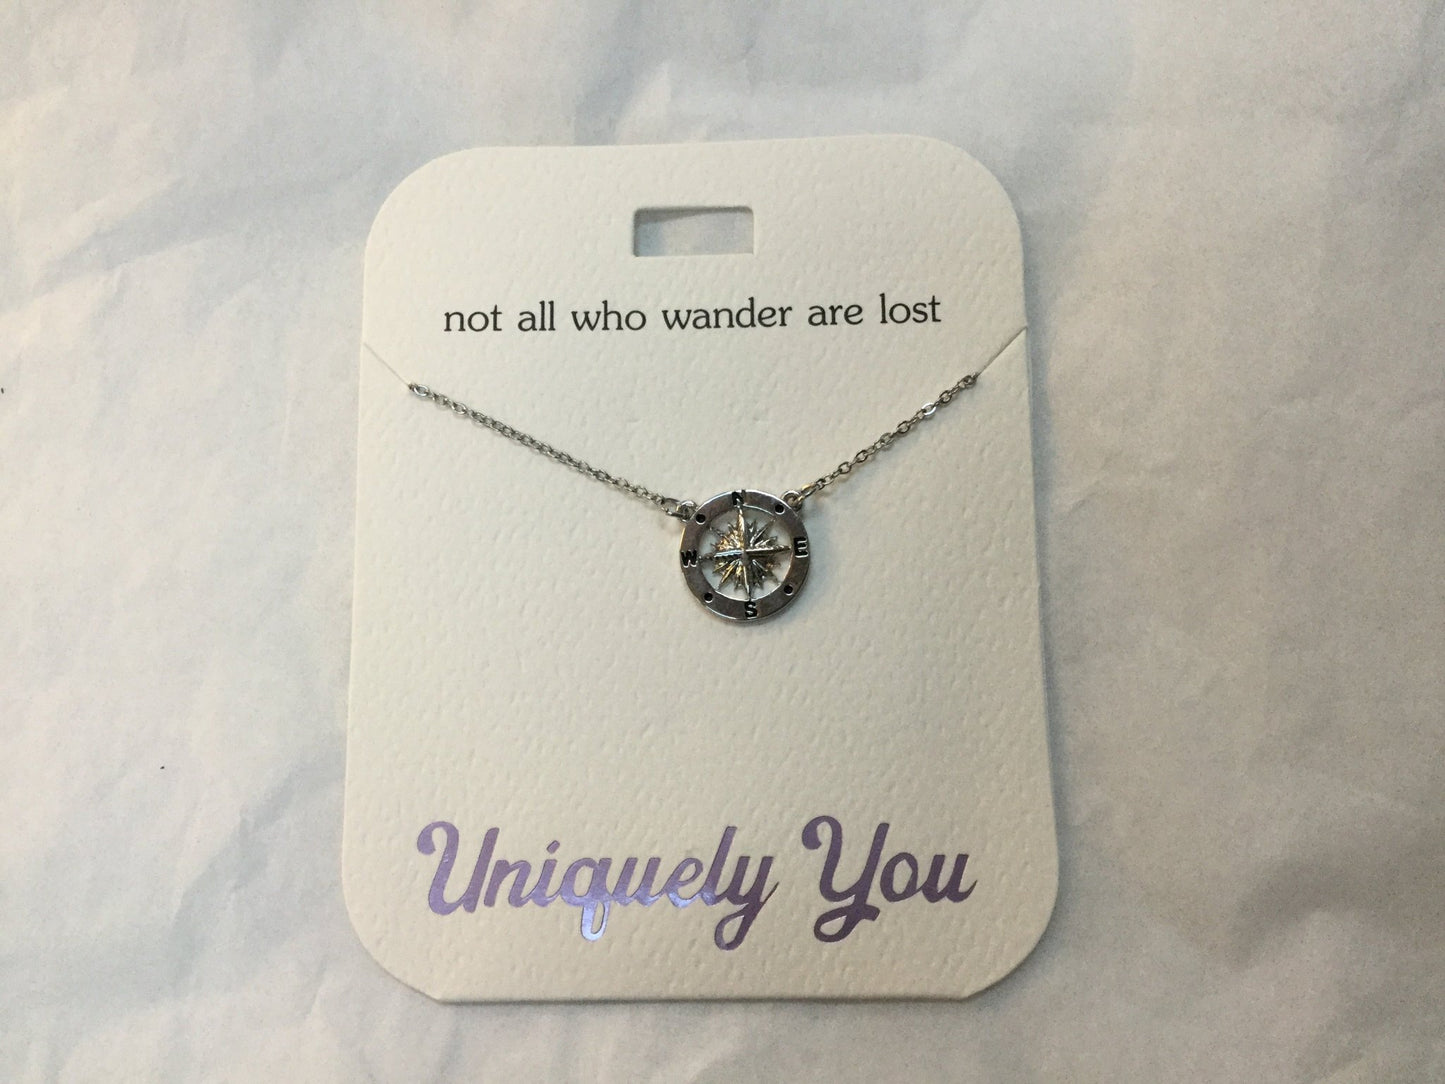 Necklace - YOU 4003 - Not all who wander are lost